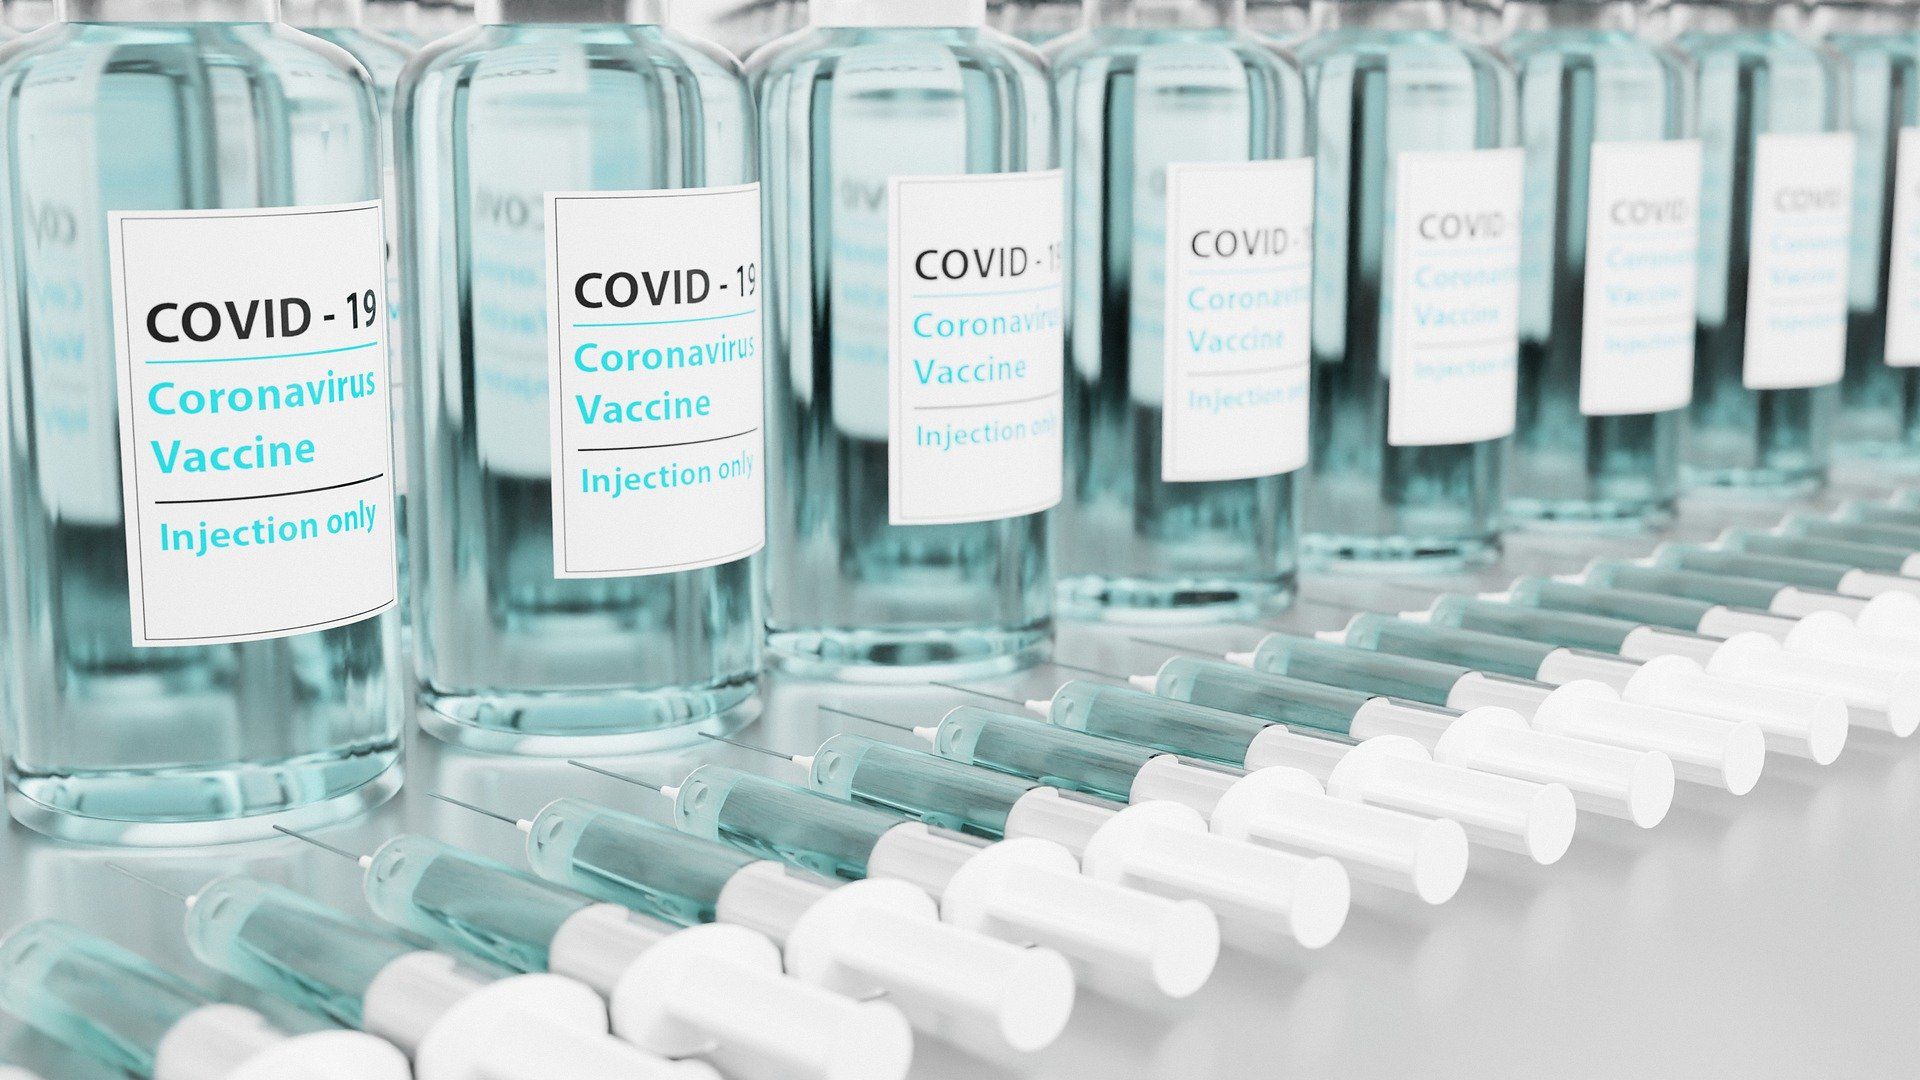 COVID-19 vaccines to be made available for all adults in France